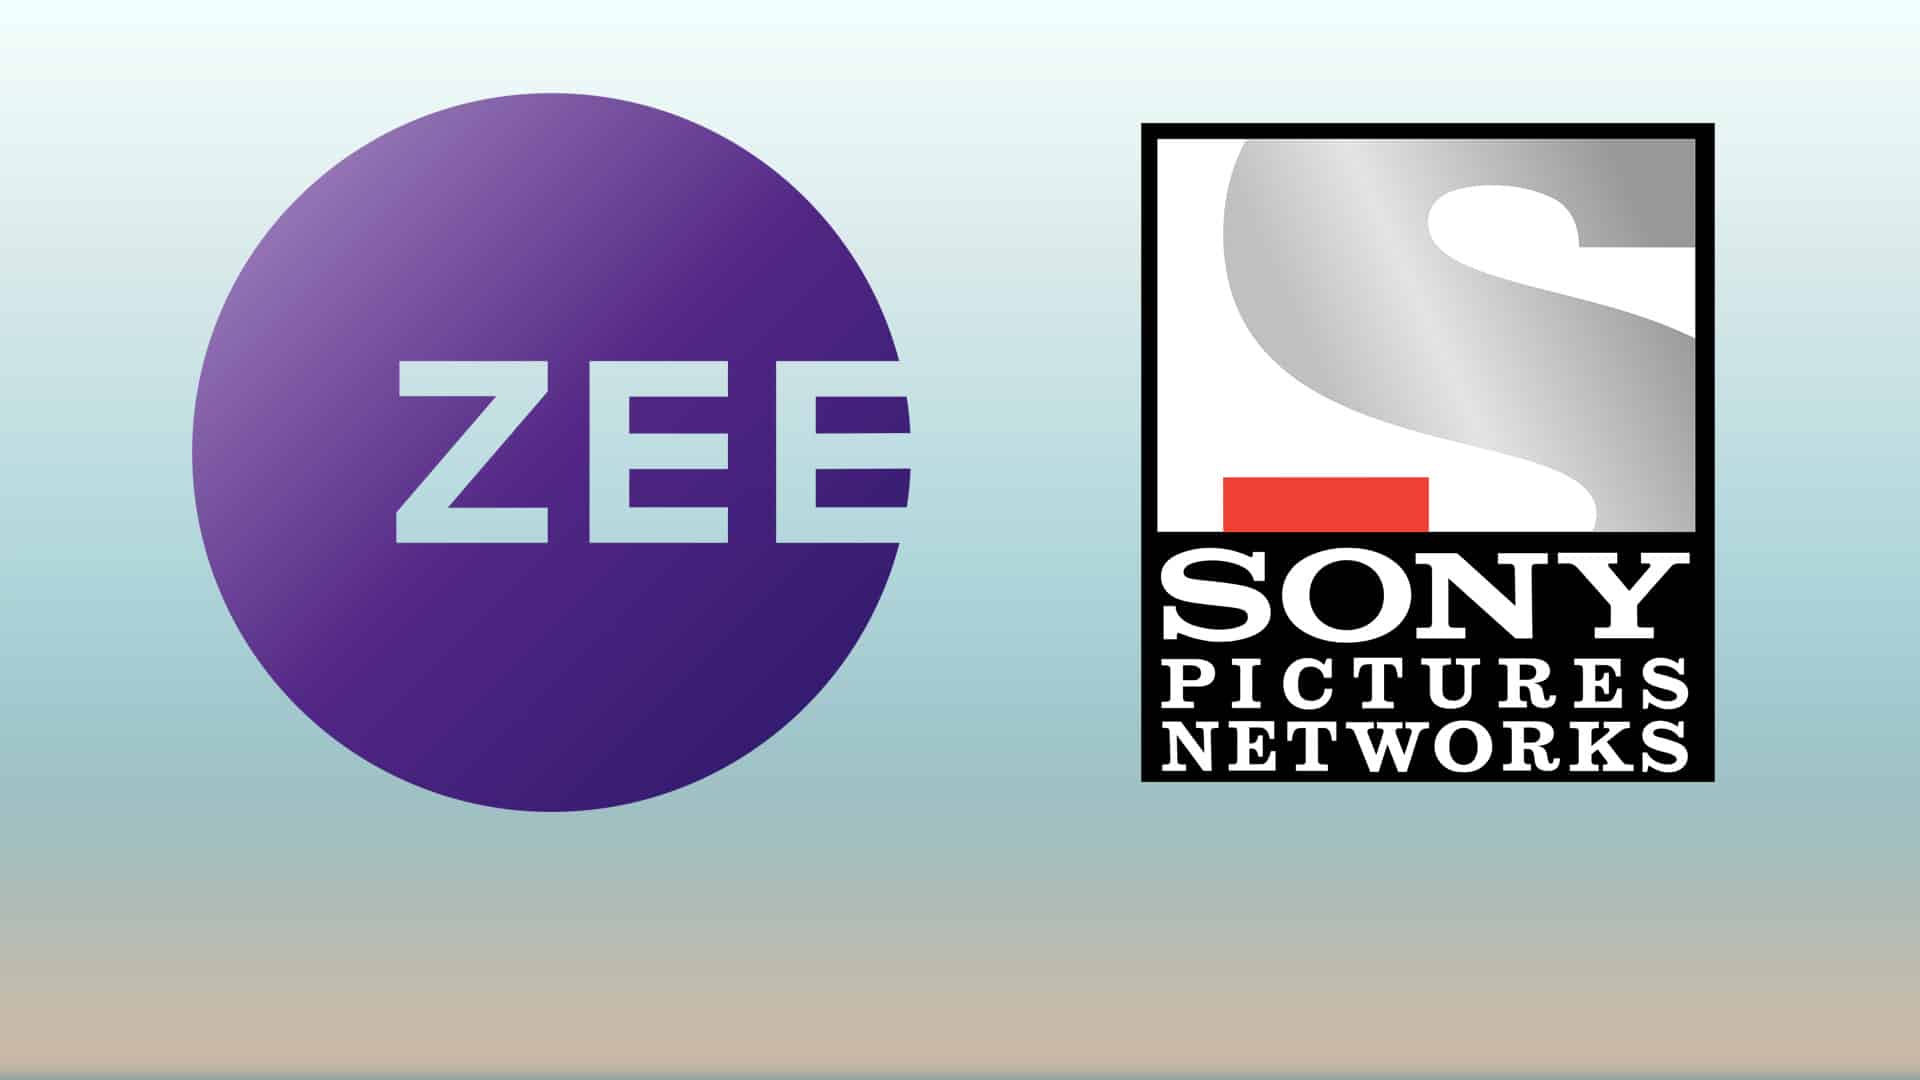 Zee Entertainment, Sony Pictures Networks India sign definitive agreements for merger